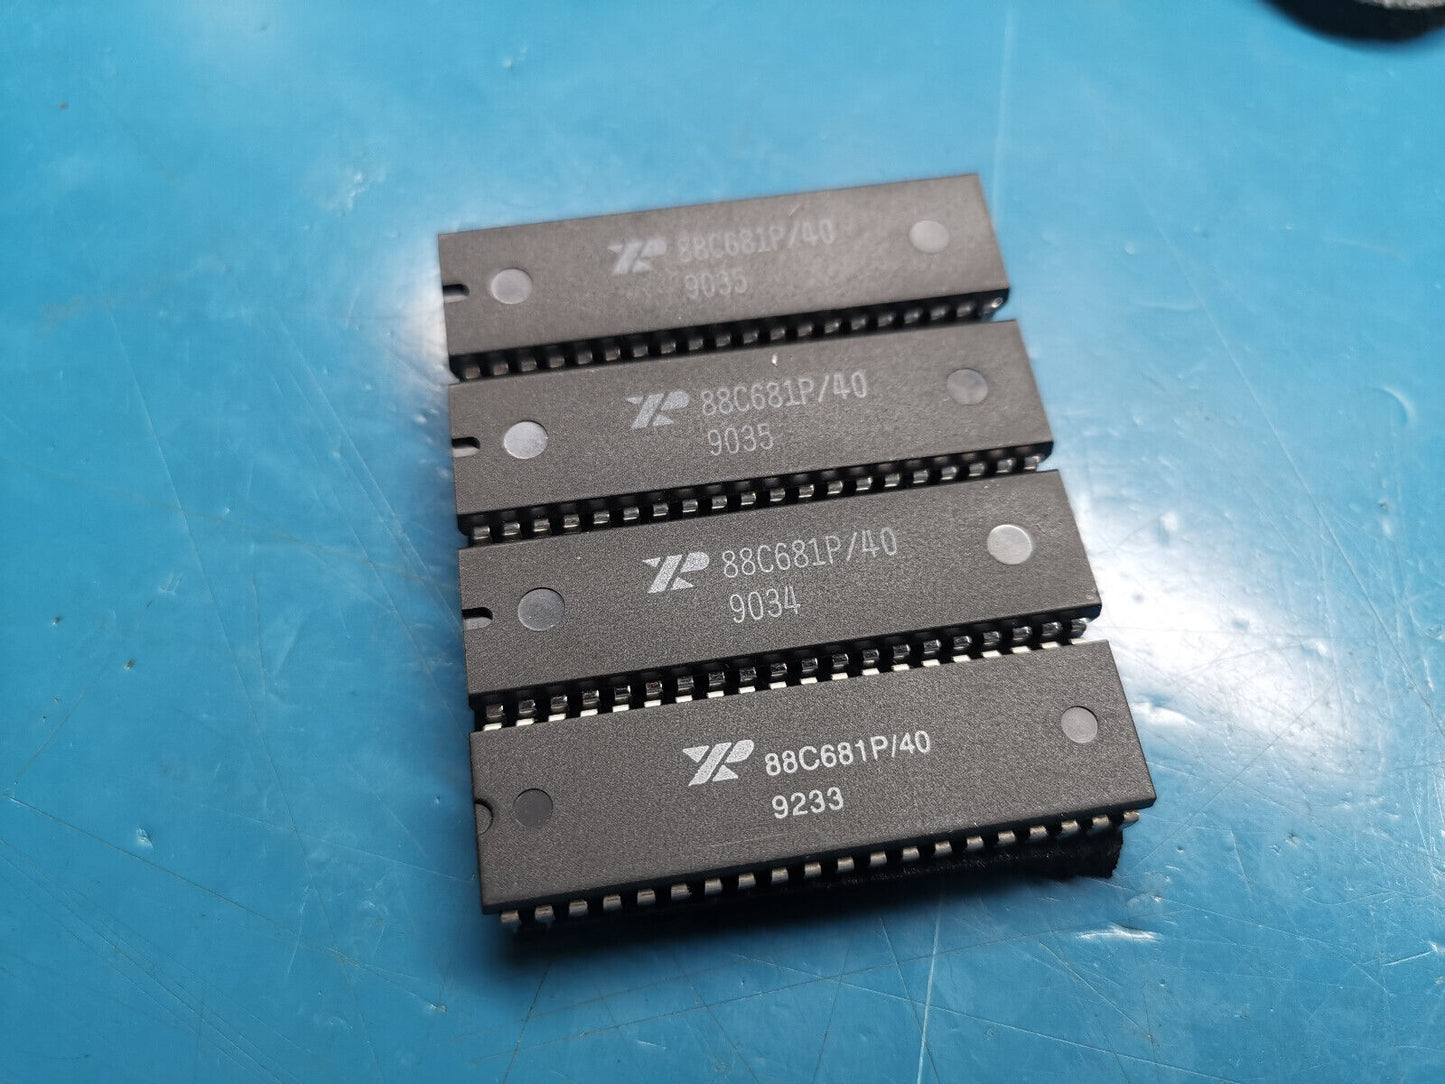 4pcs Genuine 88C681CN/40 CMOS Dual Channel UART From UK Military Hanger